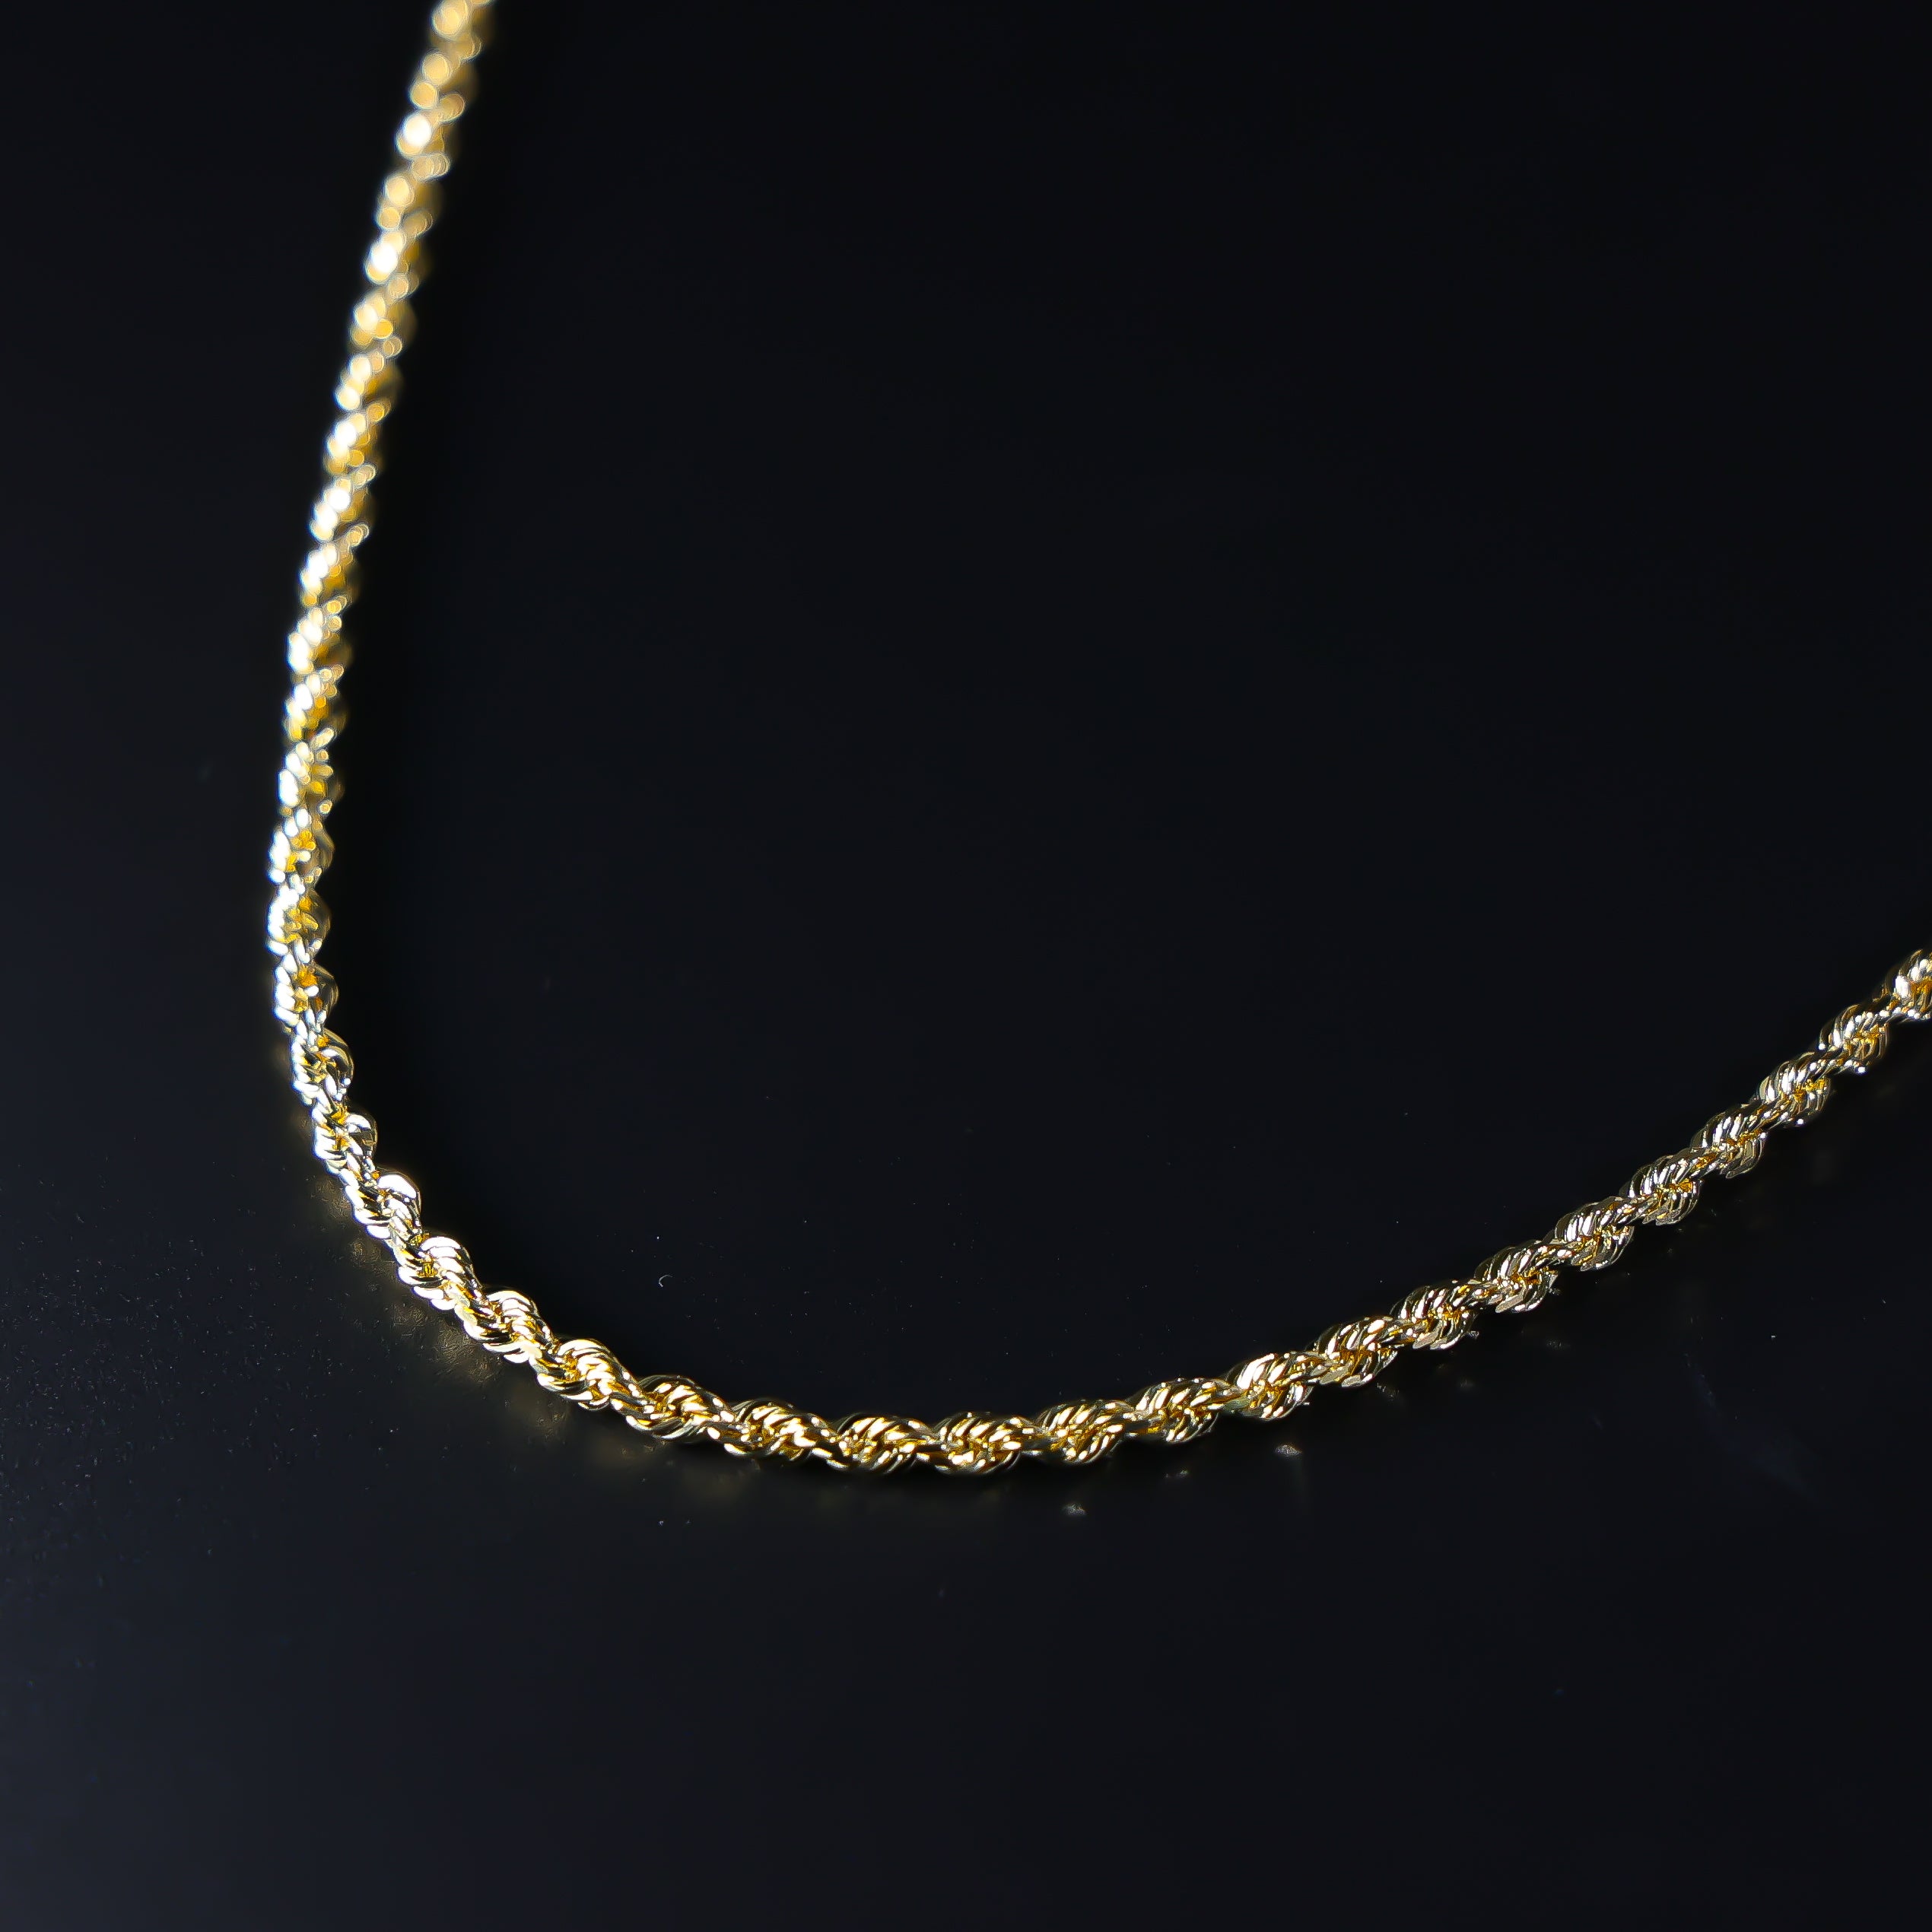 Gold Diamond Cut 3mm Solid Rope Chain Model-0387 - Charlie & Co. Jewelry